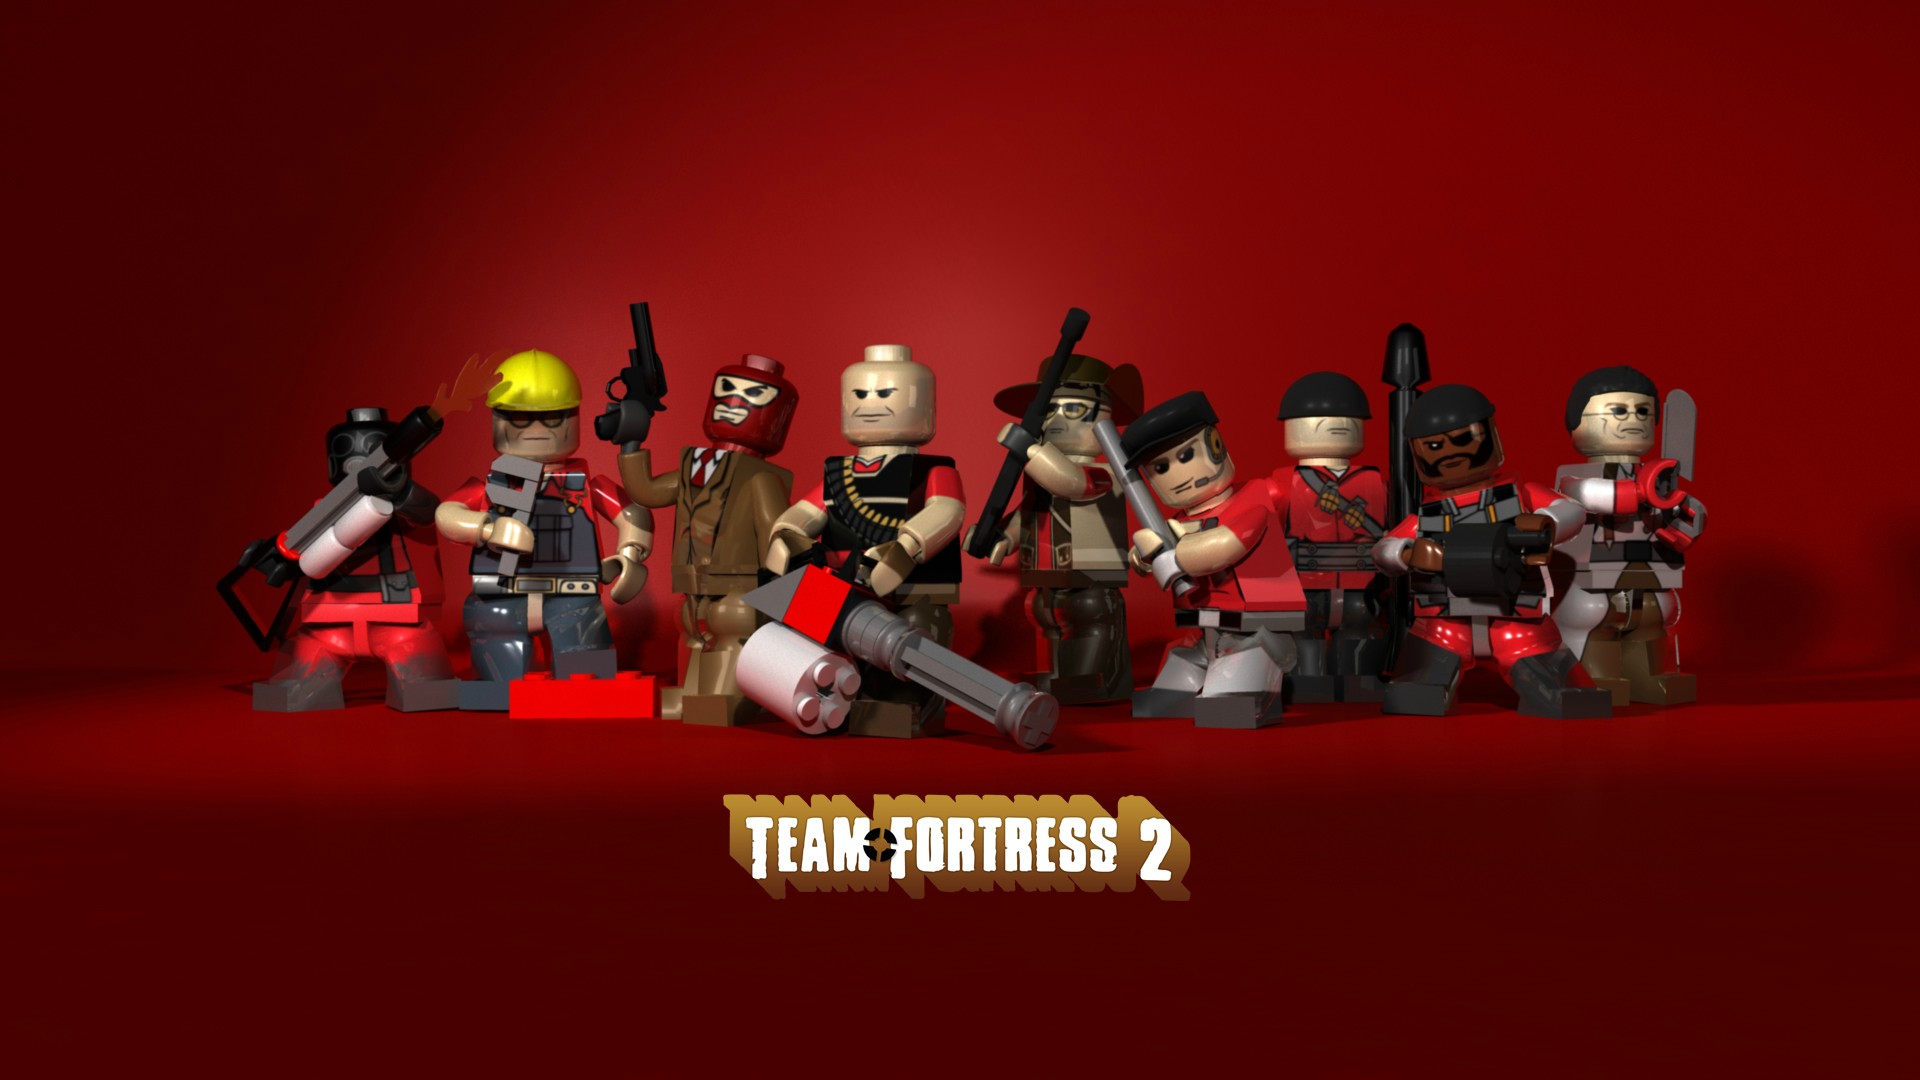 Gaming wallpaper games team fortress 2